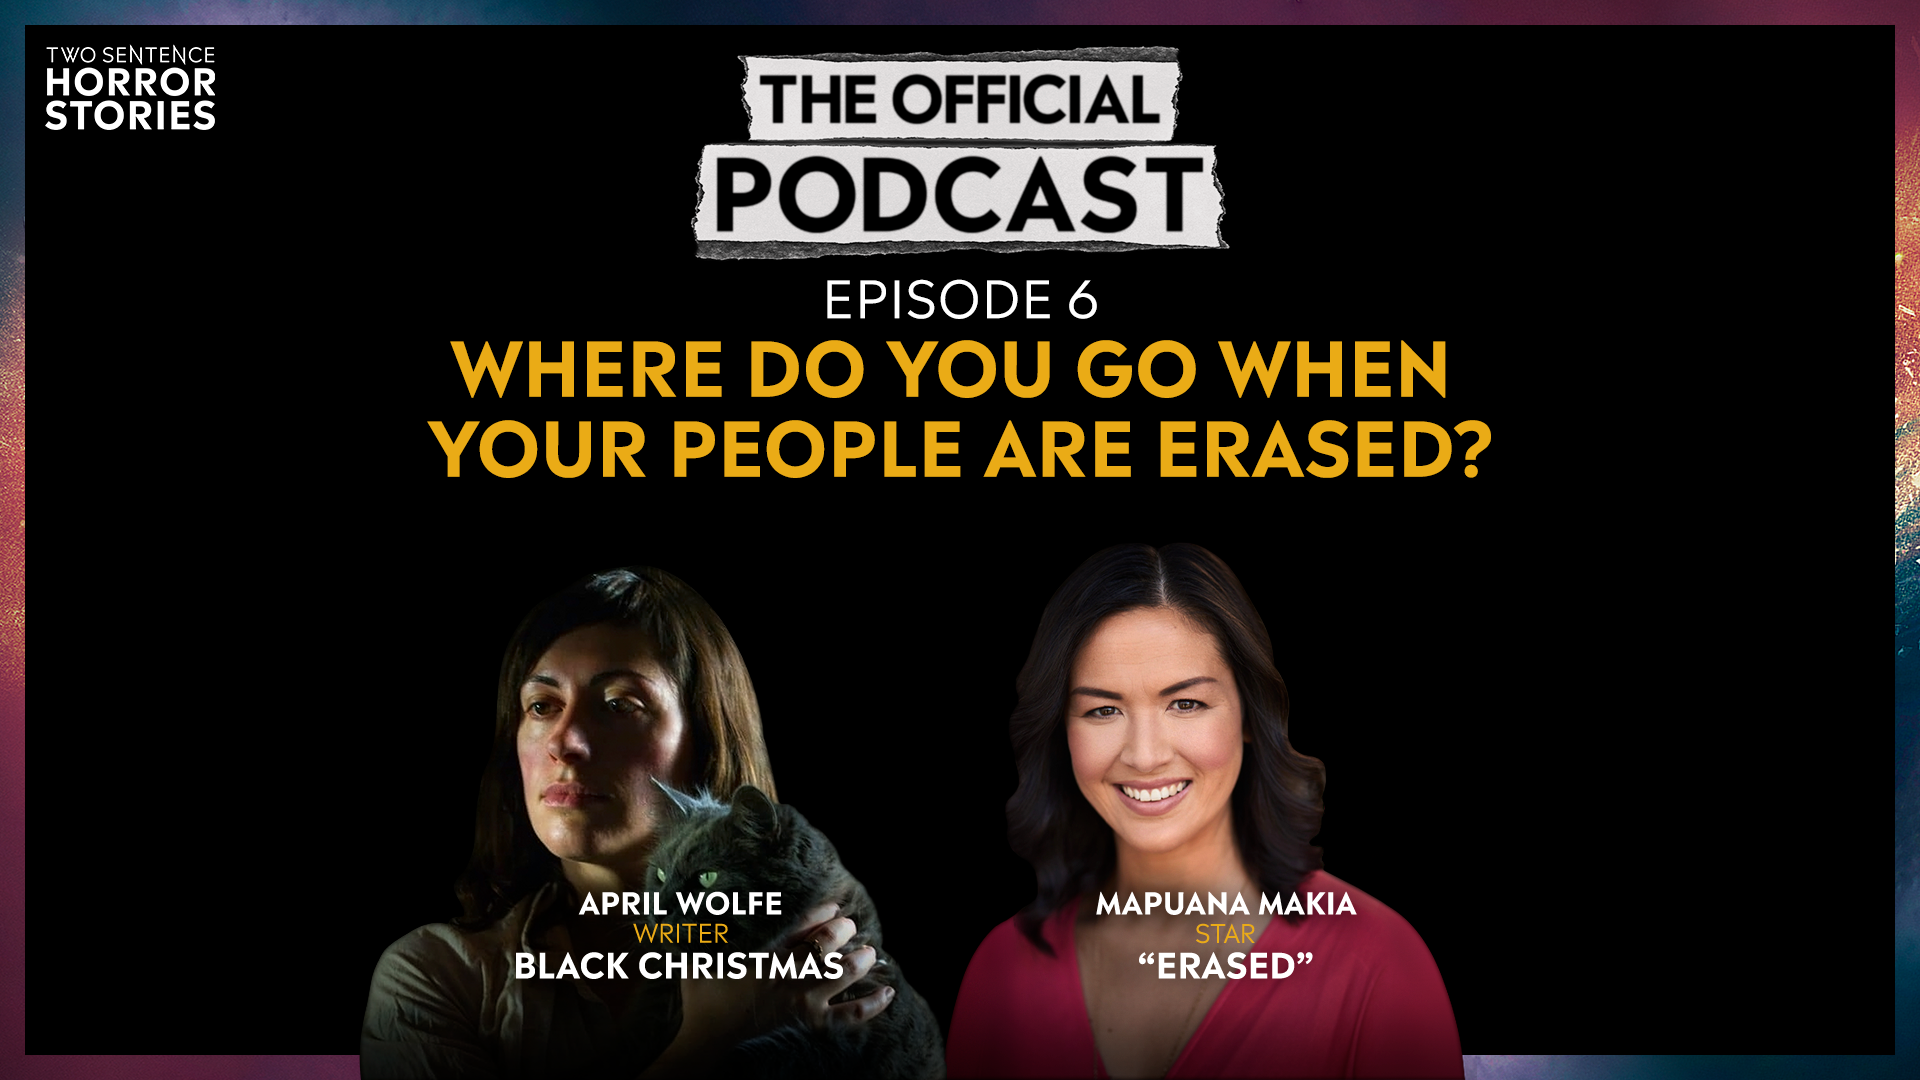 Ep 6. Where Do You Go When Your People are Erased? (With Guests Mapuana Makia and April Wolfe!)